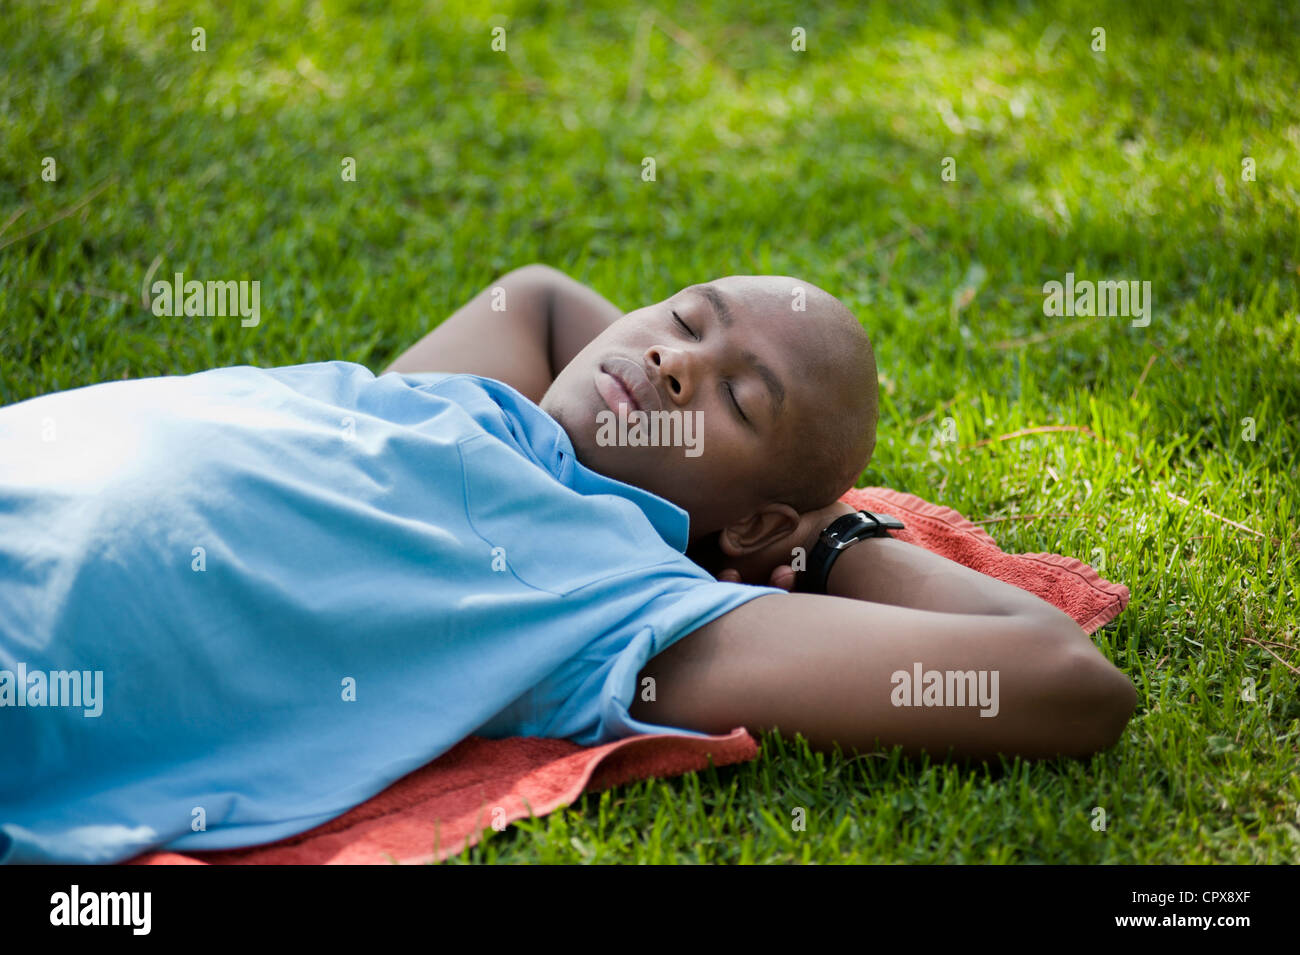 A young African man sleeping on the grass in a park Stock Photo